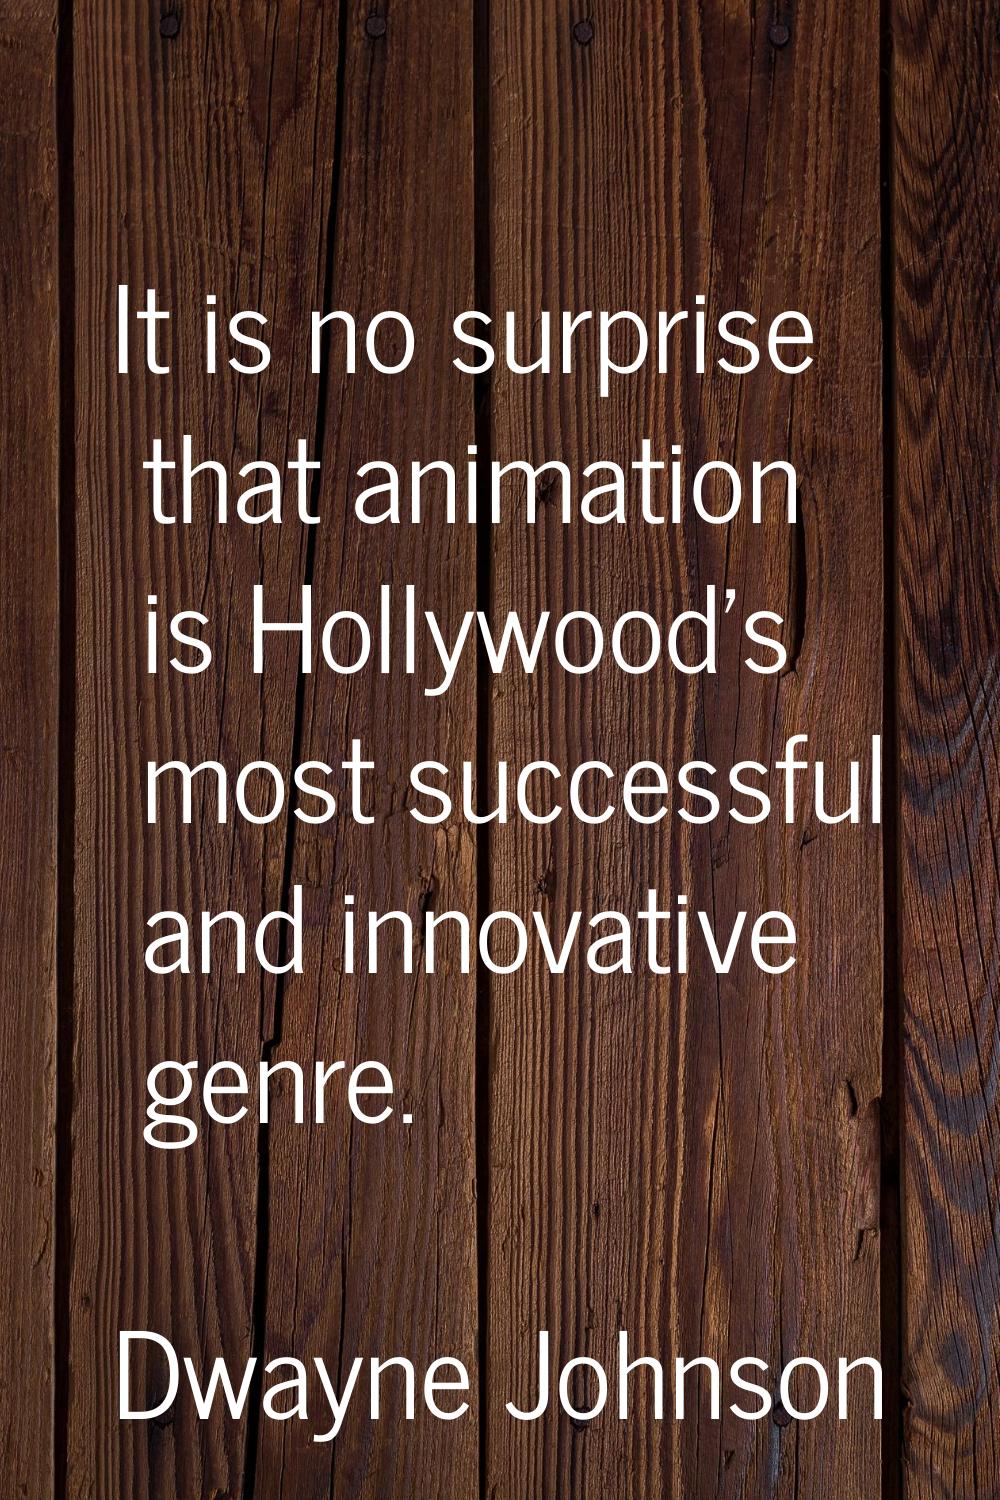 It is no surprise that animation is Hollywood's most successful and innovative genre.